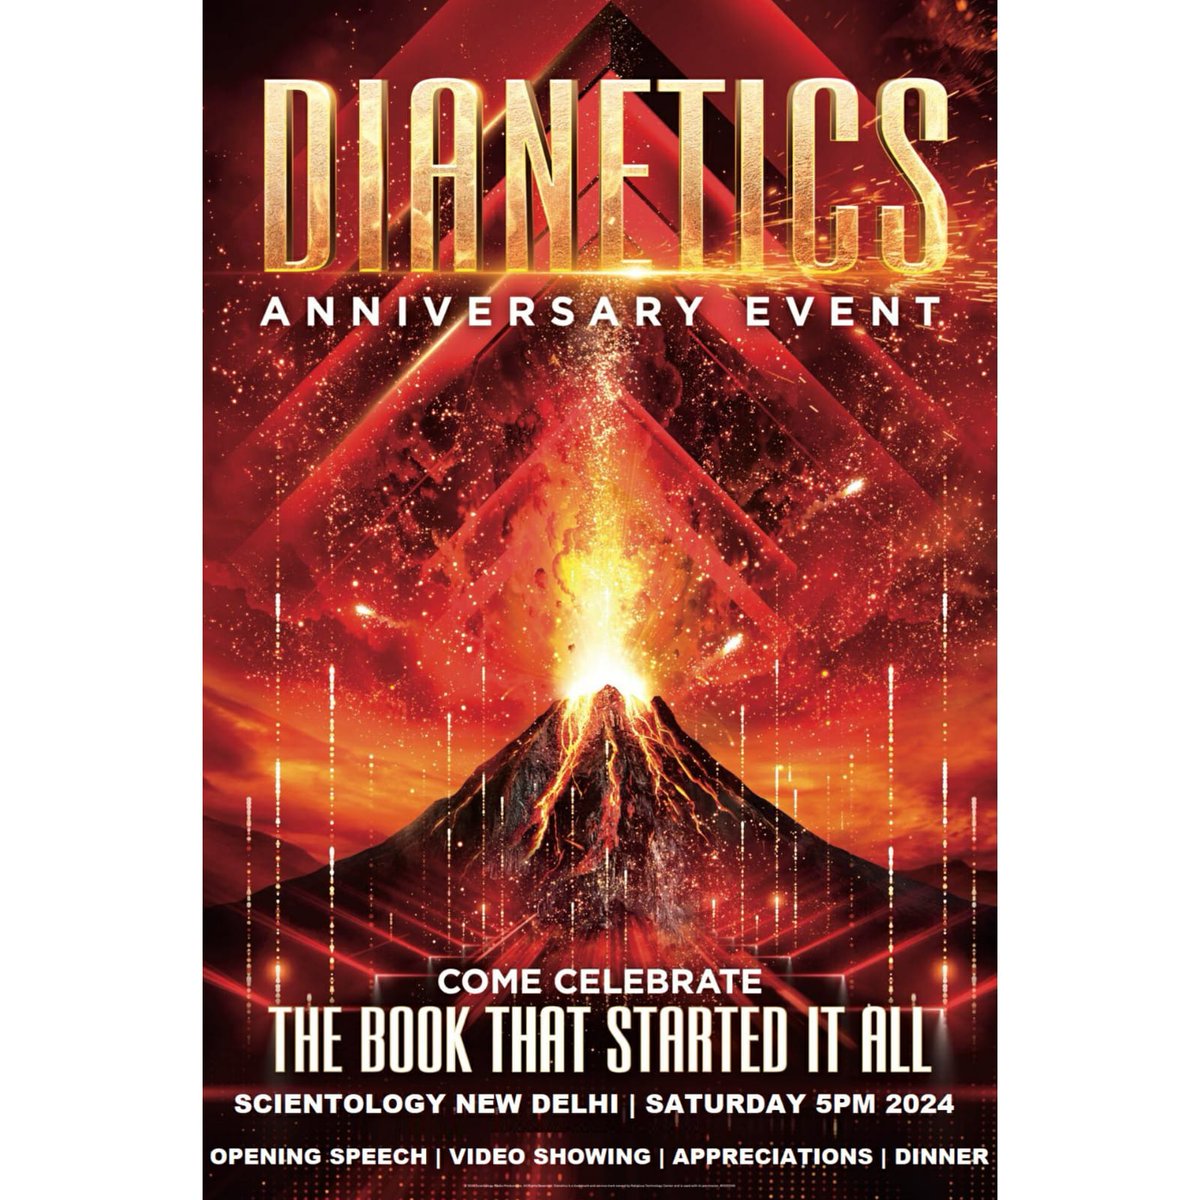 I would like to invite you to the SUPER AMAZING, MUST ATTEND
🥳🥳 Dianetics Anniversary Event 🥳🥳 on this 11th May, Saturday. 

Time - 5PM to 8PM
Highlights : 
OPENING SPEECH
VIDEO SHOWING
APPRECIATIONS
DINNER

Please confirm your seat.

Regards
New Delhi Scientology Team